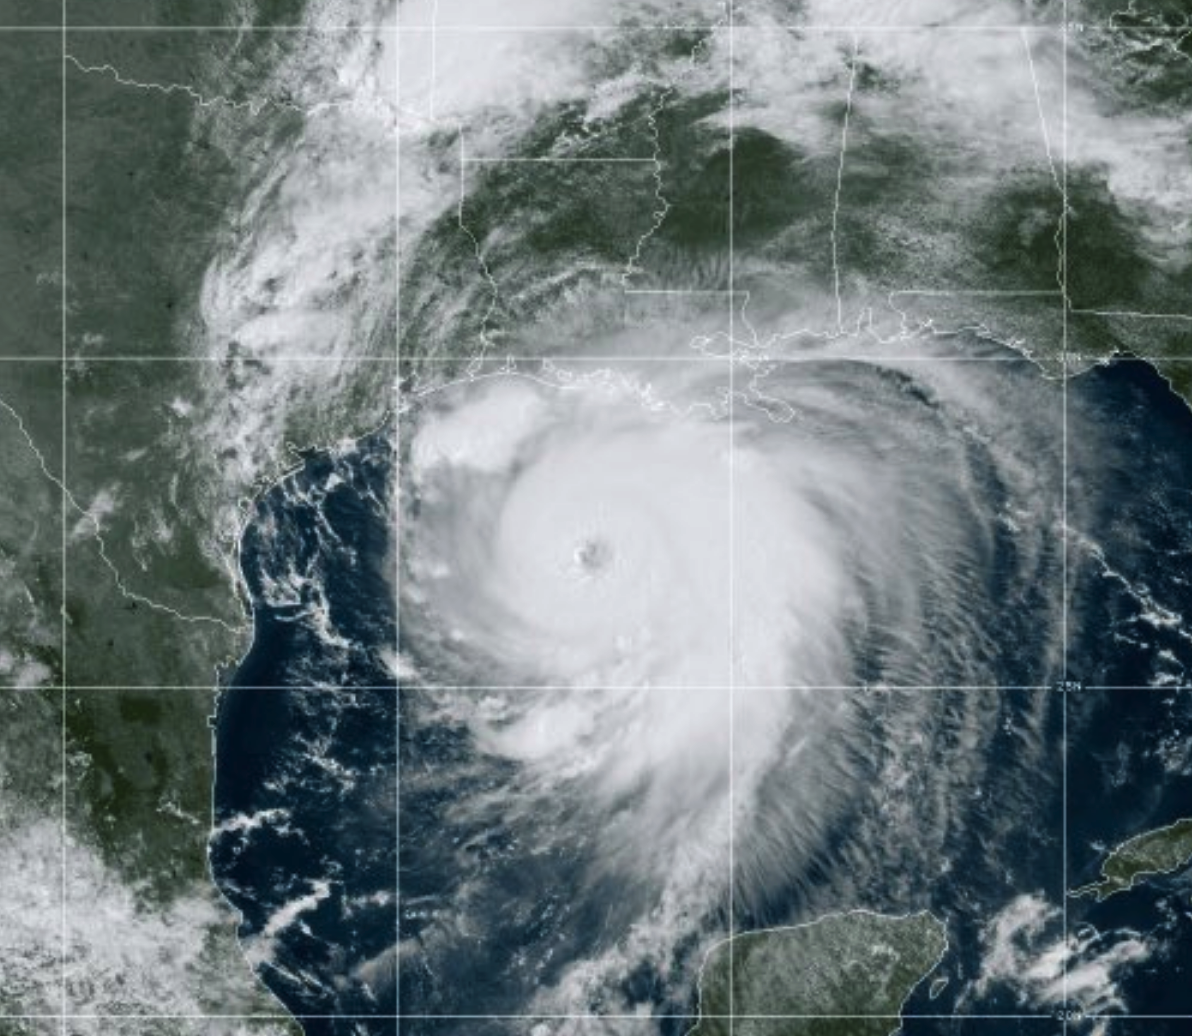 “Full Beast Mode”: Hurricane Laura Has The Potential To Be One Of The Greatest Natural Disasters In All Of U.S. History